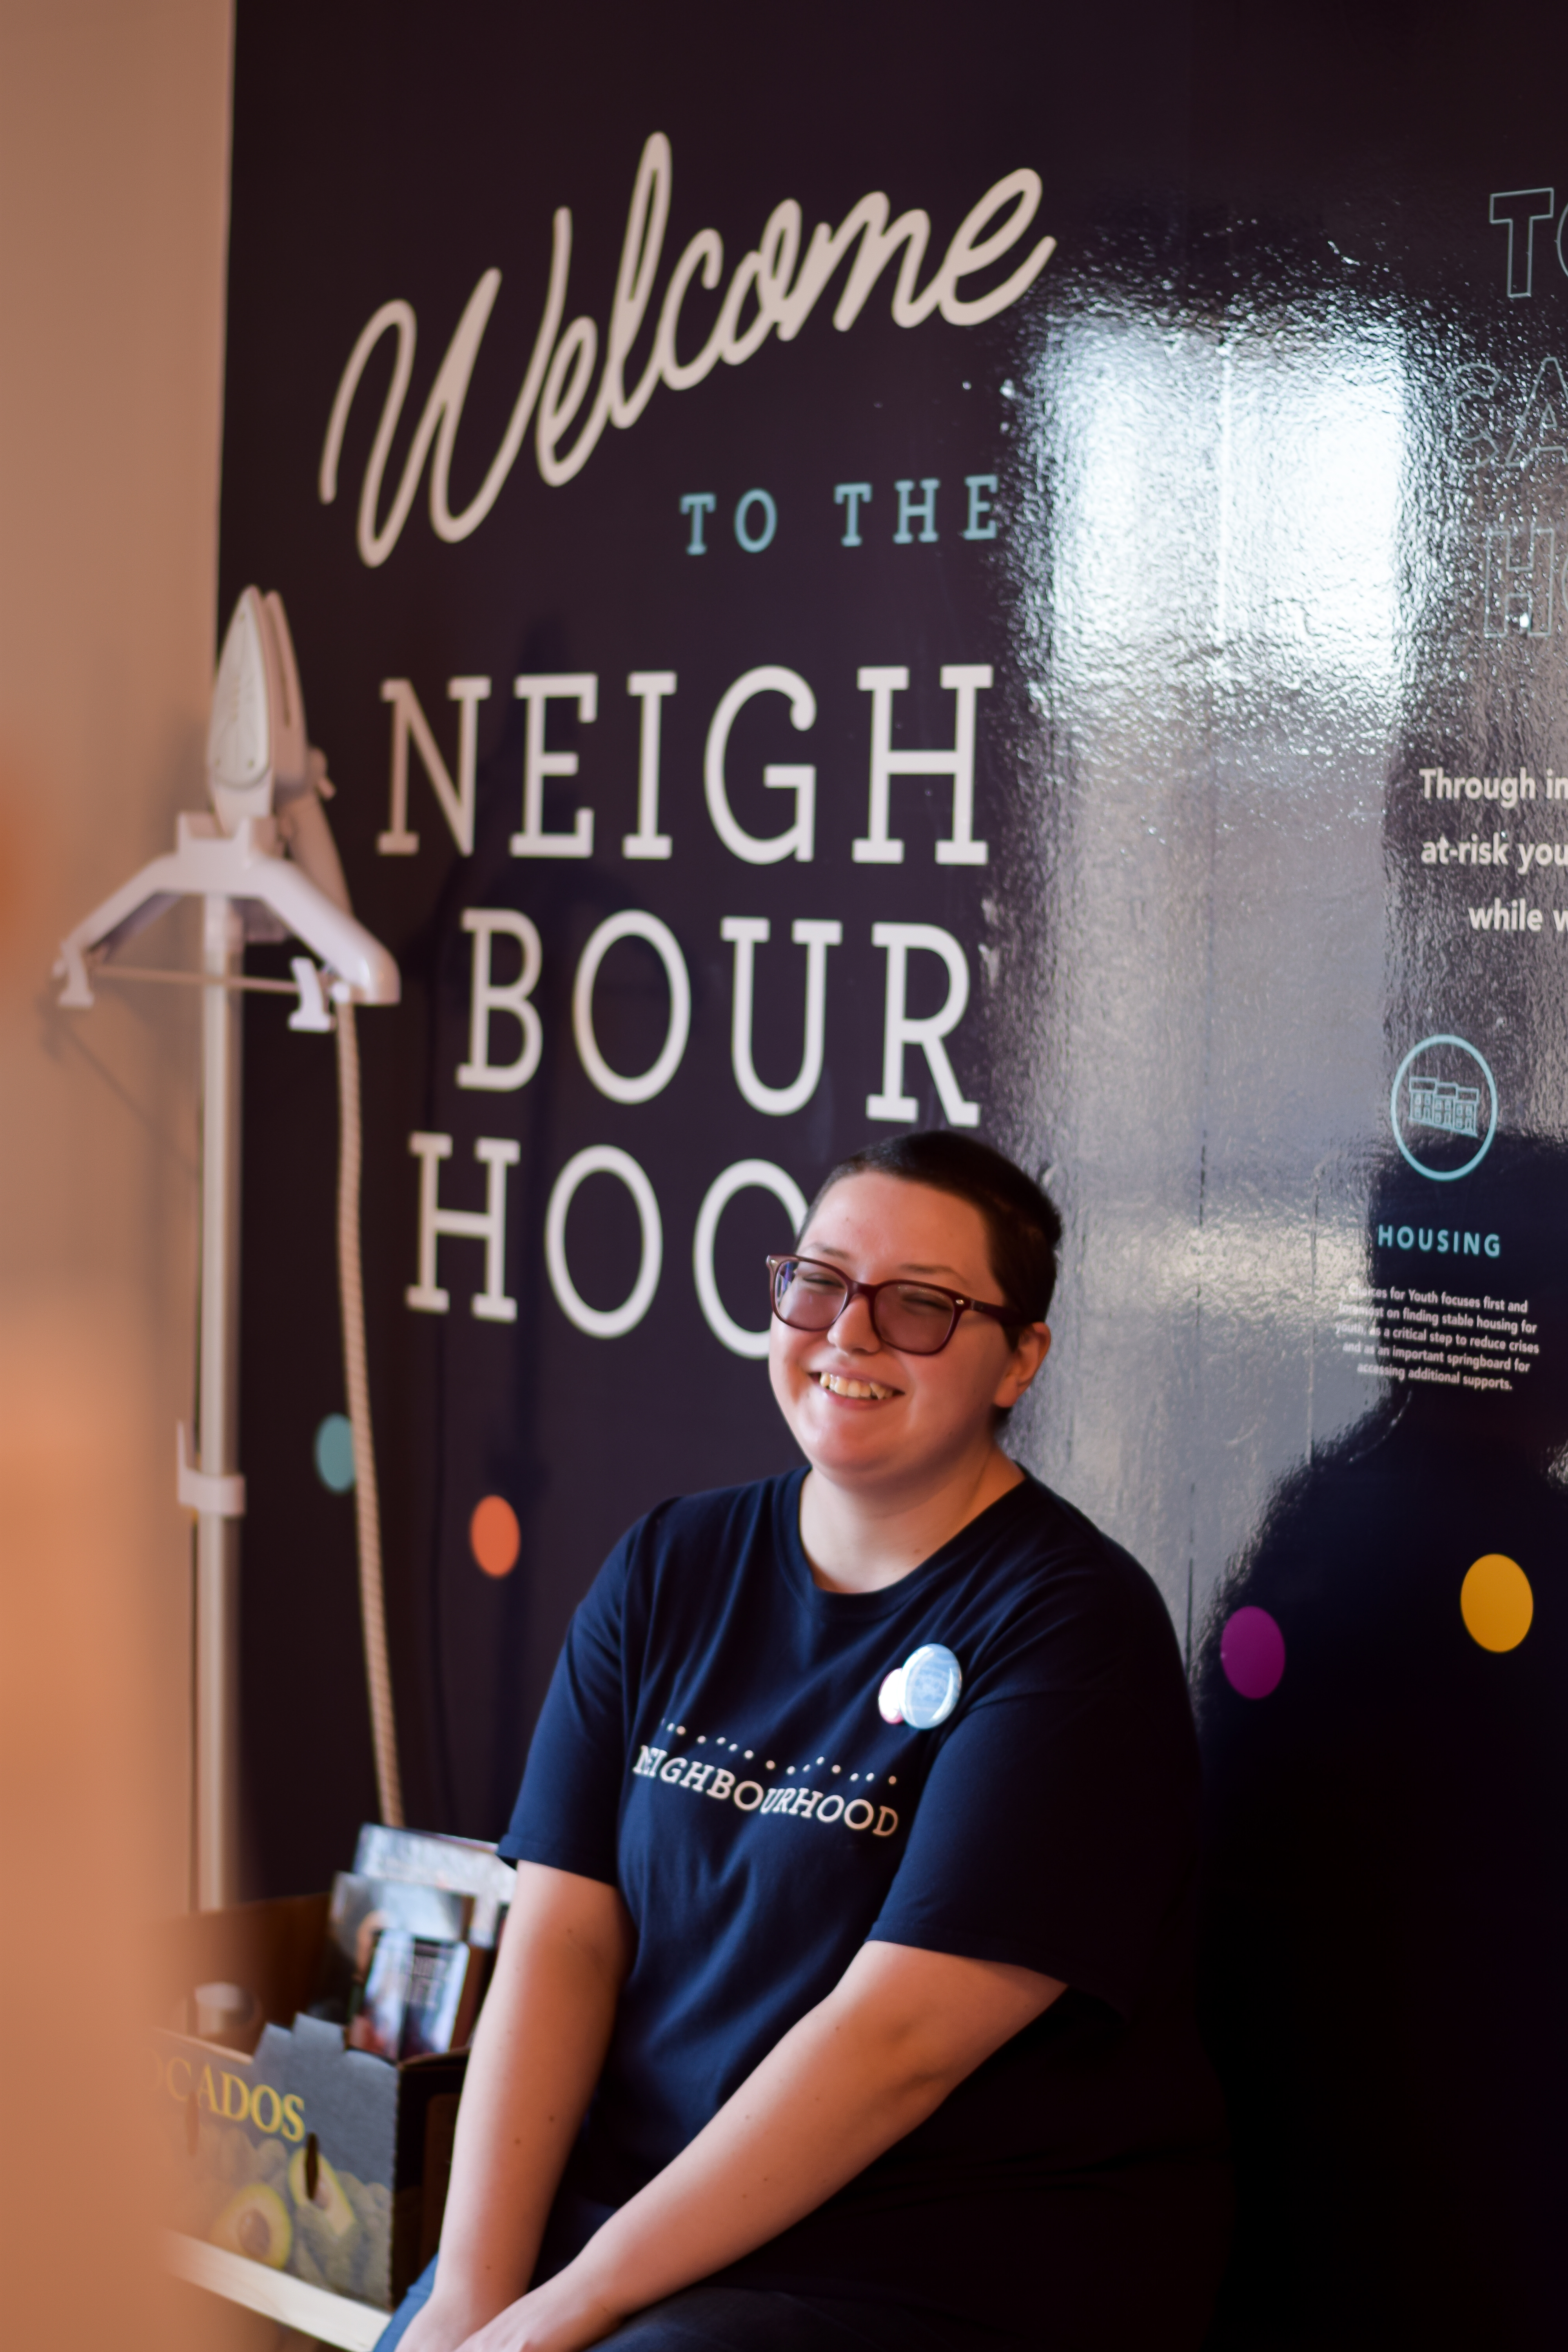 Kim Hamlyn began working for the thrift store, Neighbourhood, when it opened in August. Neighbourhood is a Choices for Youth social enterprise. Ashley Sheppard/Kicker 